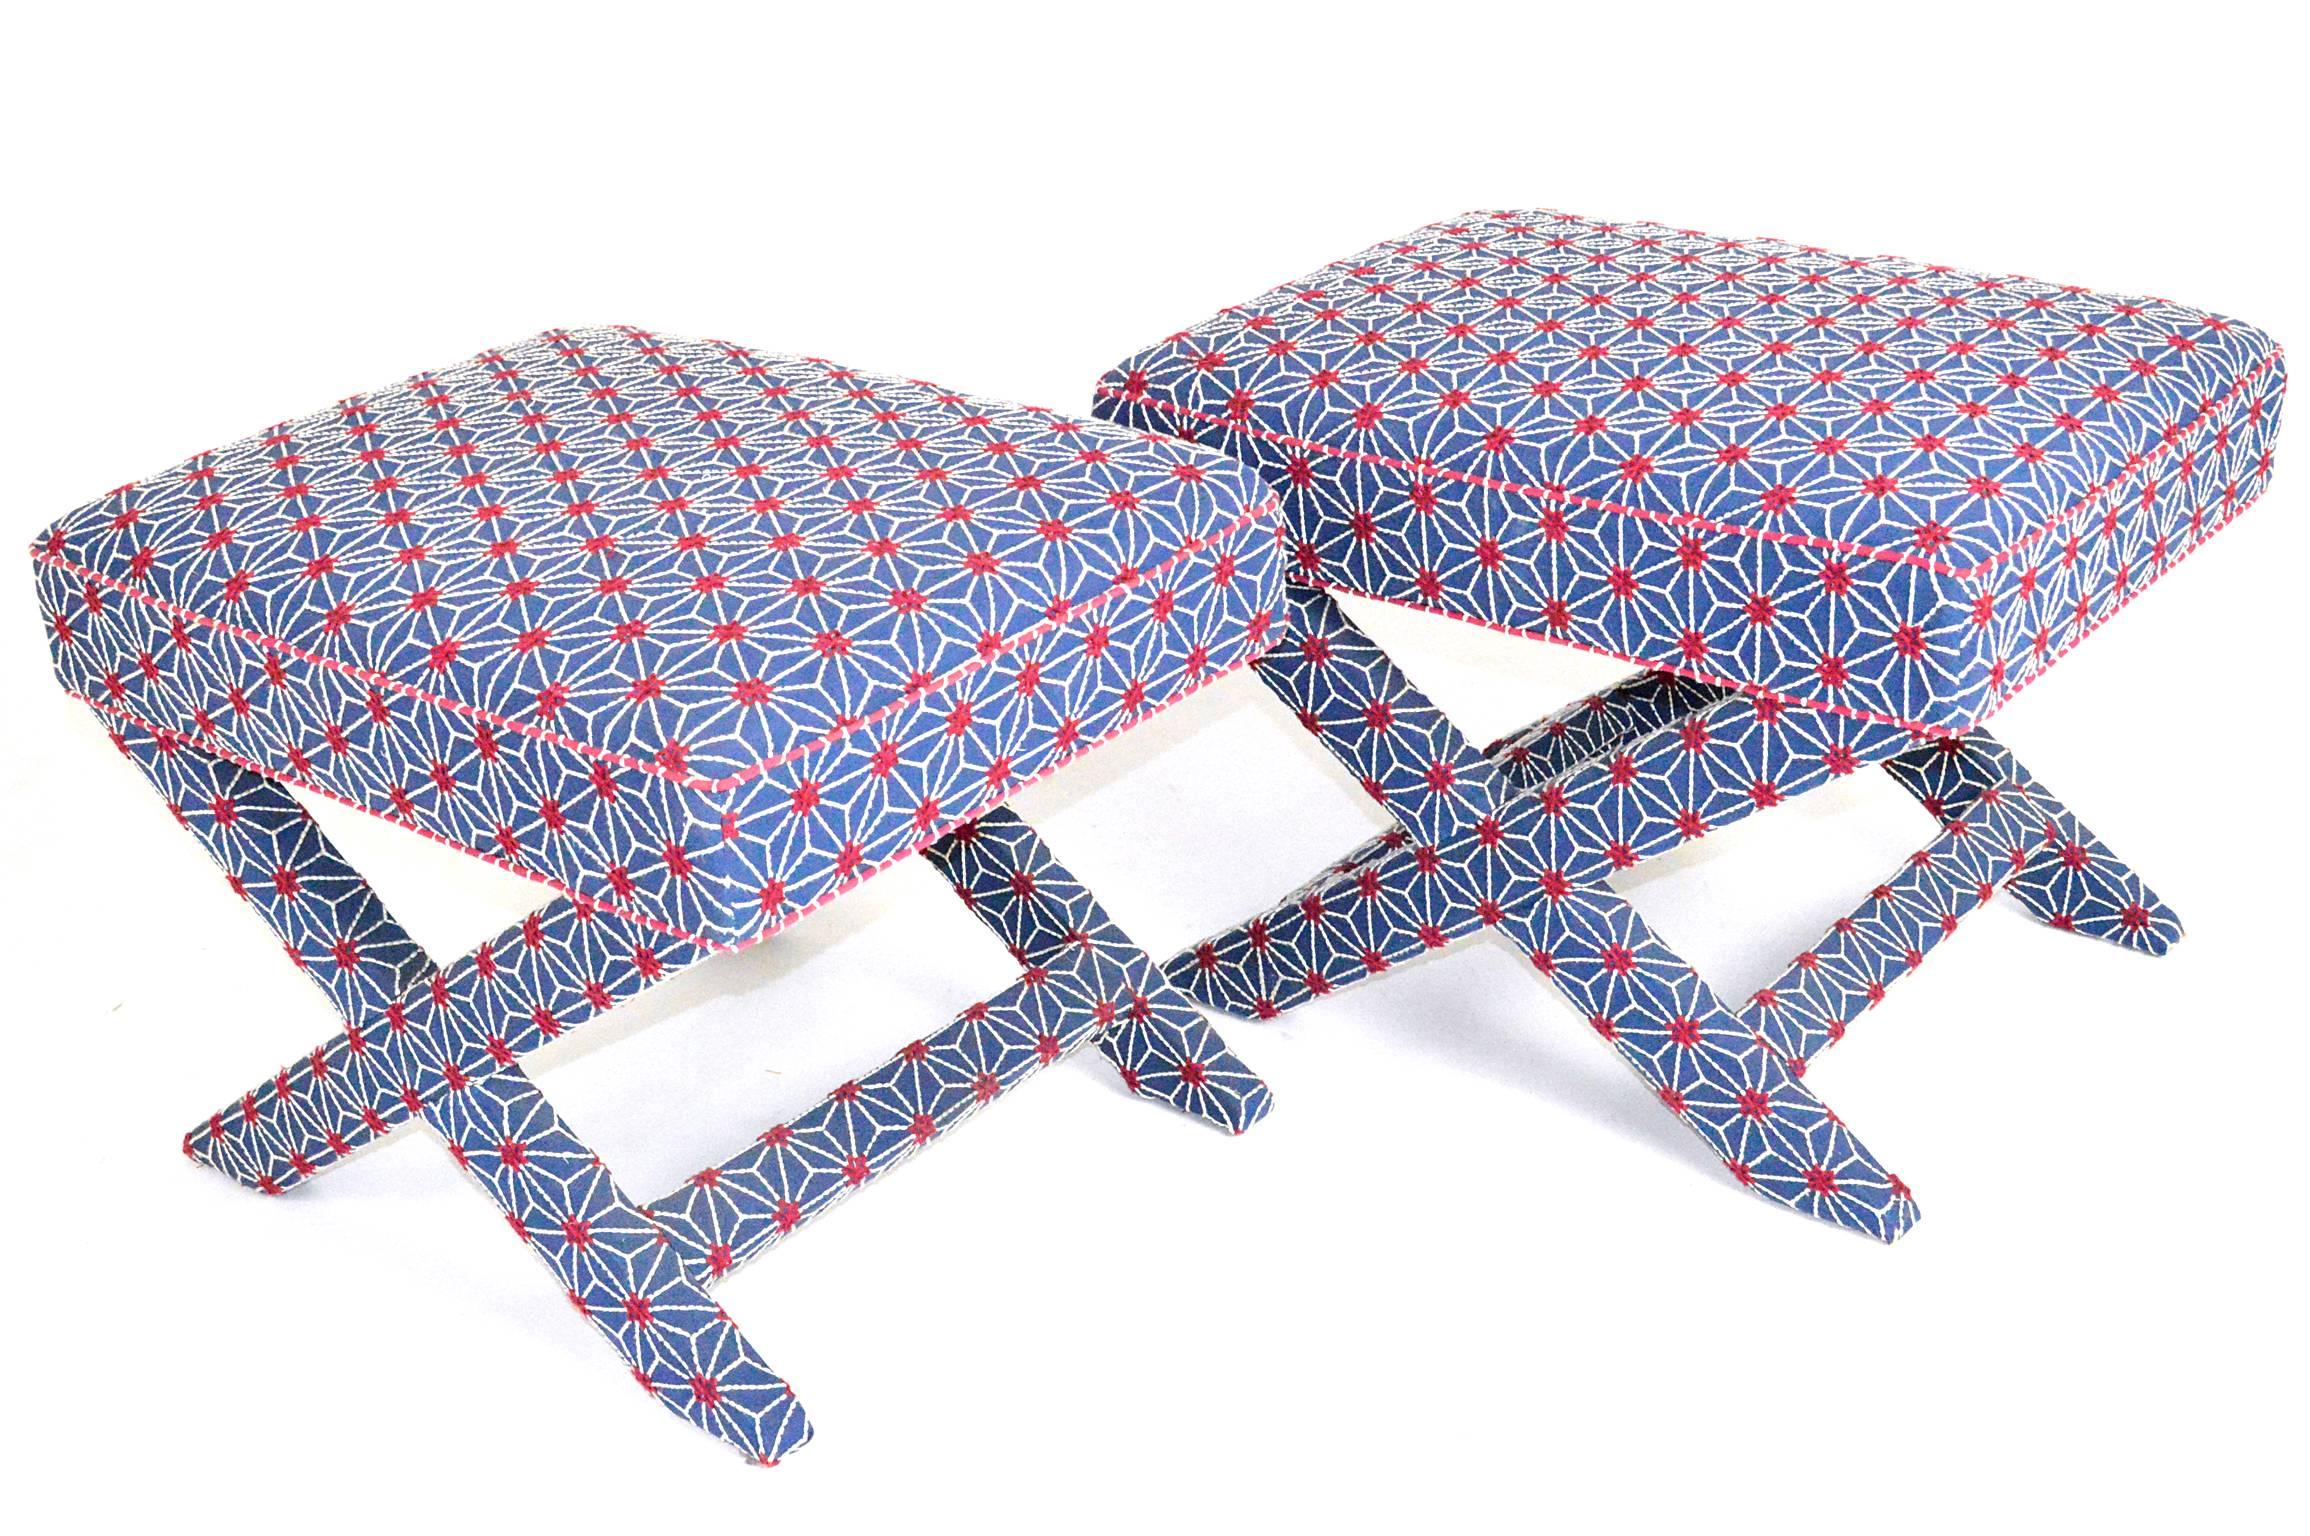 Pair of upholstered x-form stools in a red white and blue crewel upholstery.